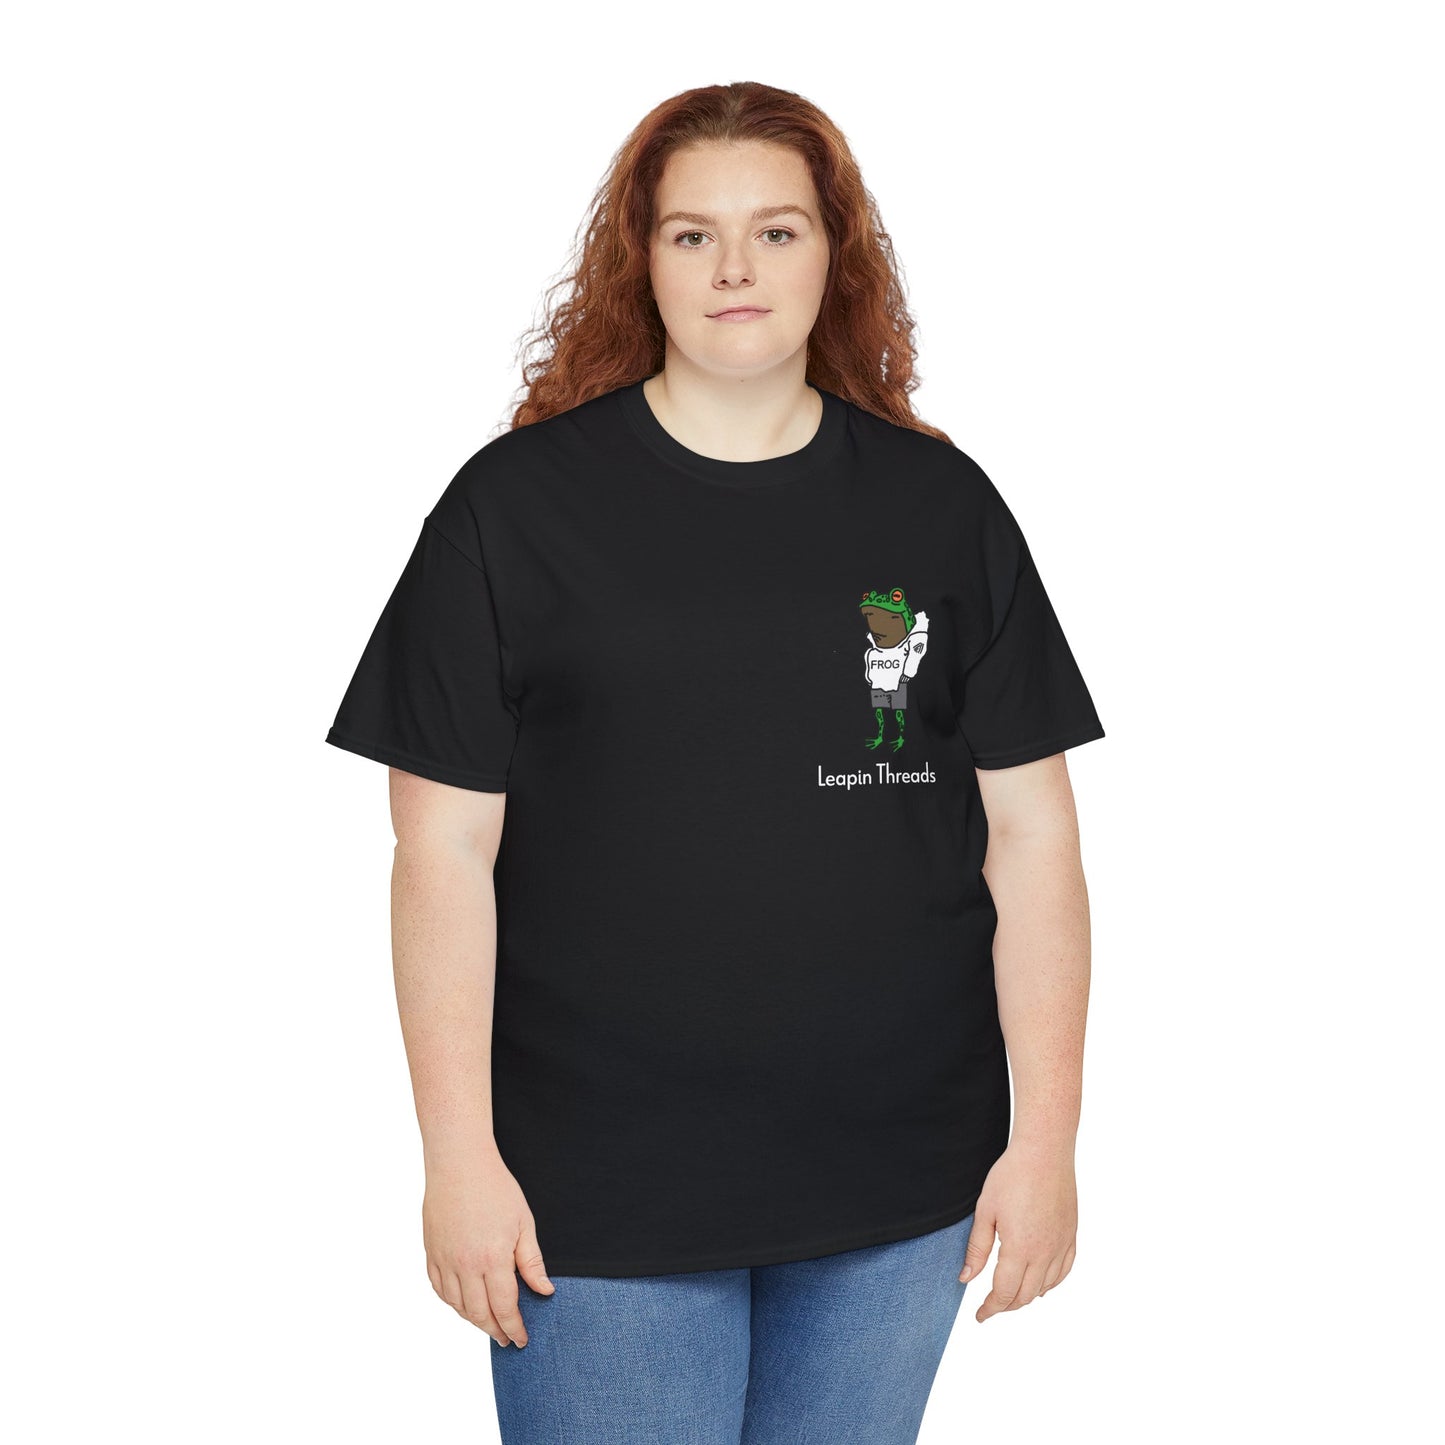 The Funky Frog Tee